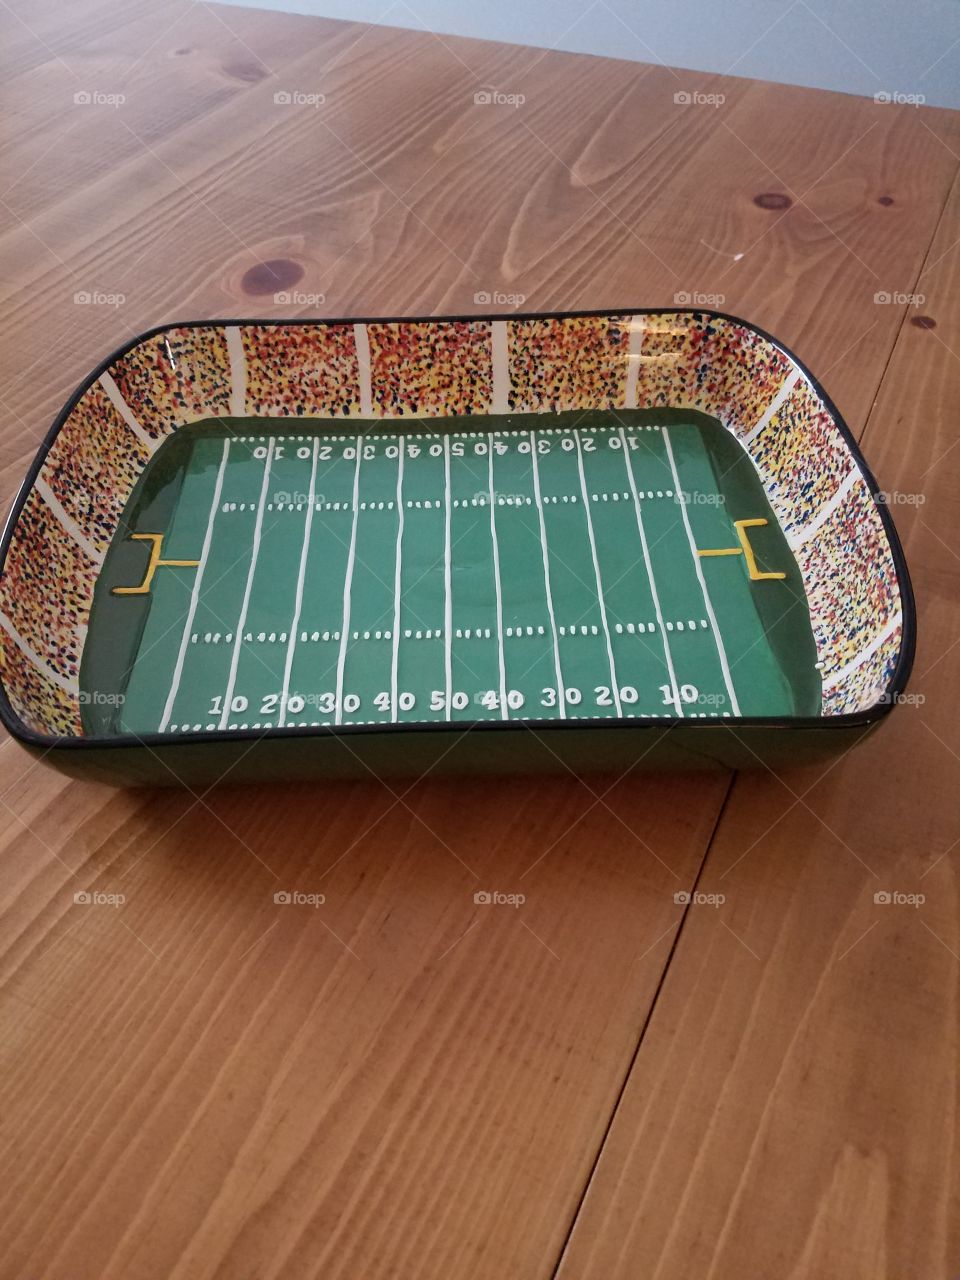 Super Bowl party ceramic chip bowlsby, football field and fans theme